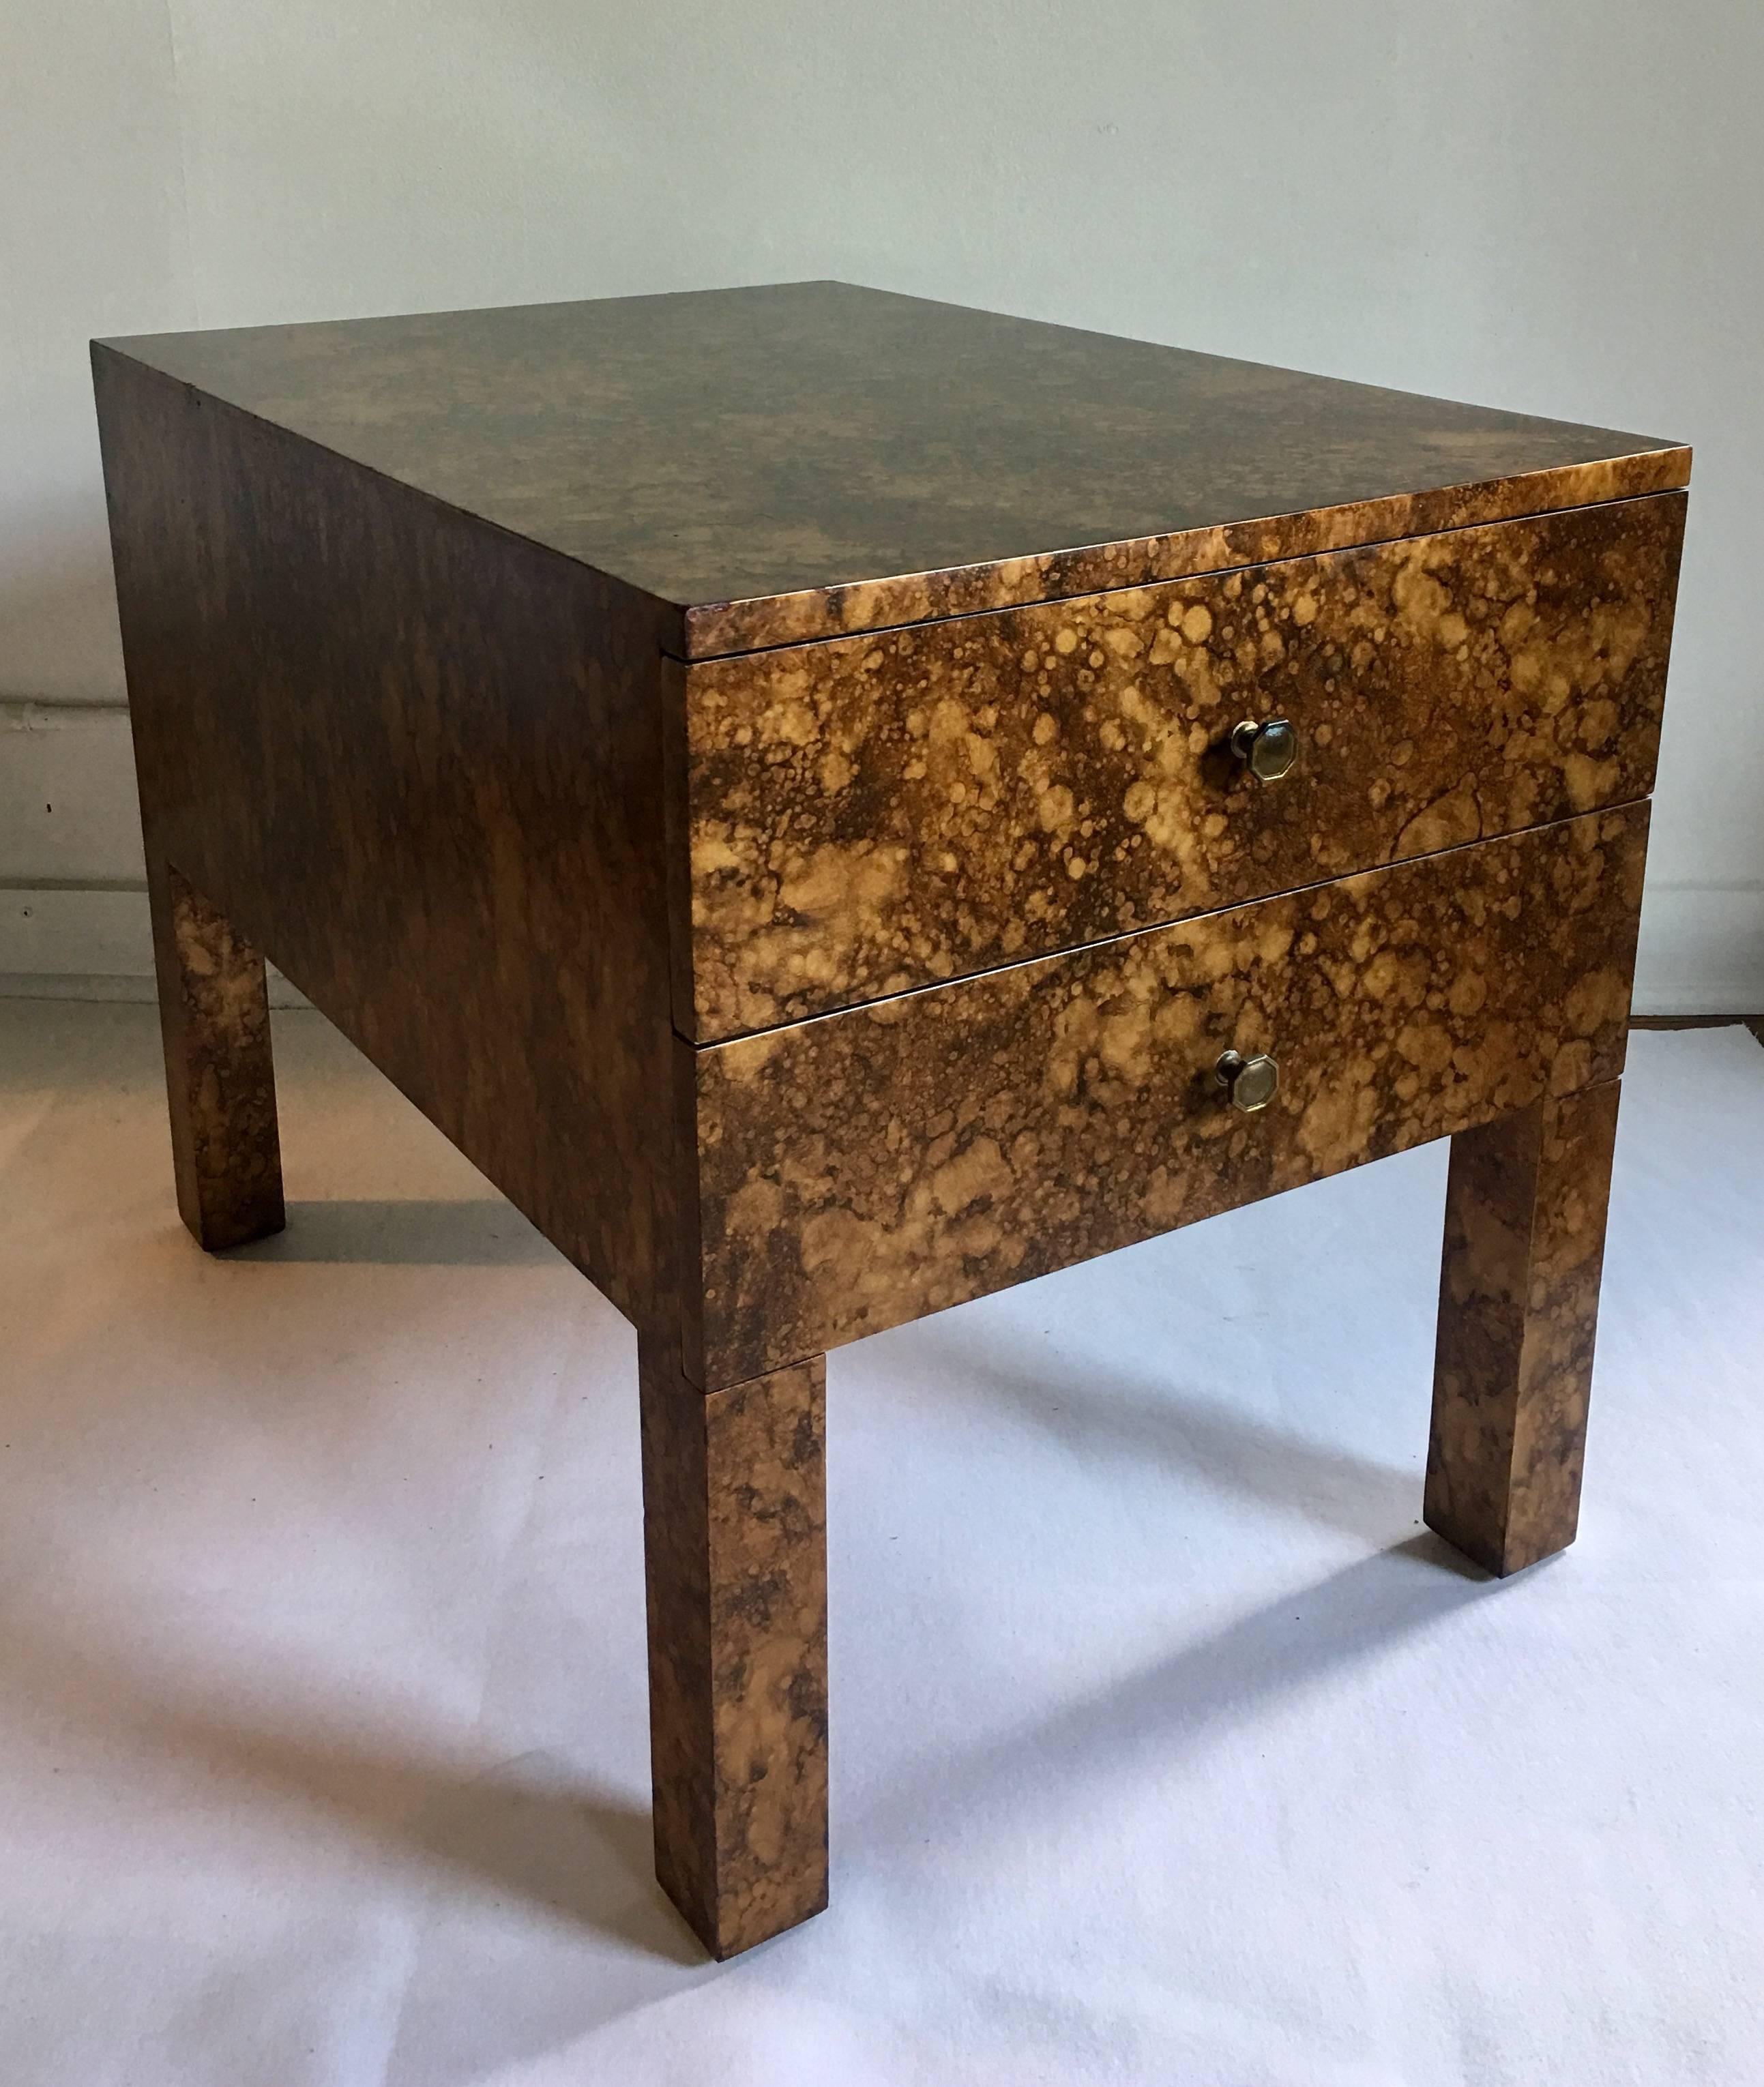 Mid-Century Modern parsons style side or end table. This rectangular shaped two drawer wood accent table features a hand painted faux tortoise shell or oil drip finish. Original brass hardware. A solid and heavy piece. In the style of Billy Haines